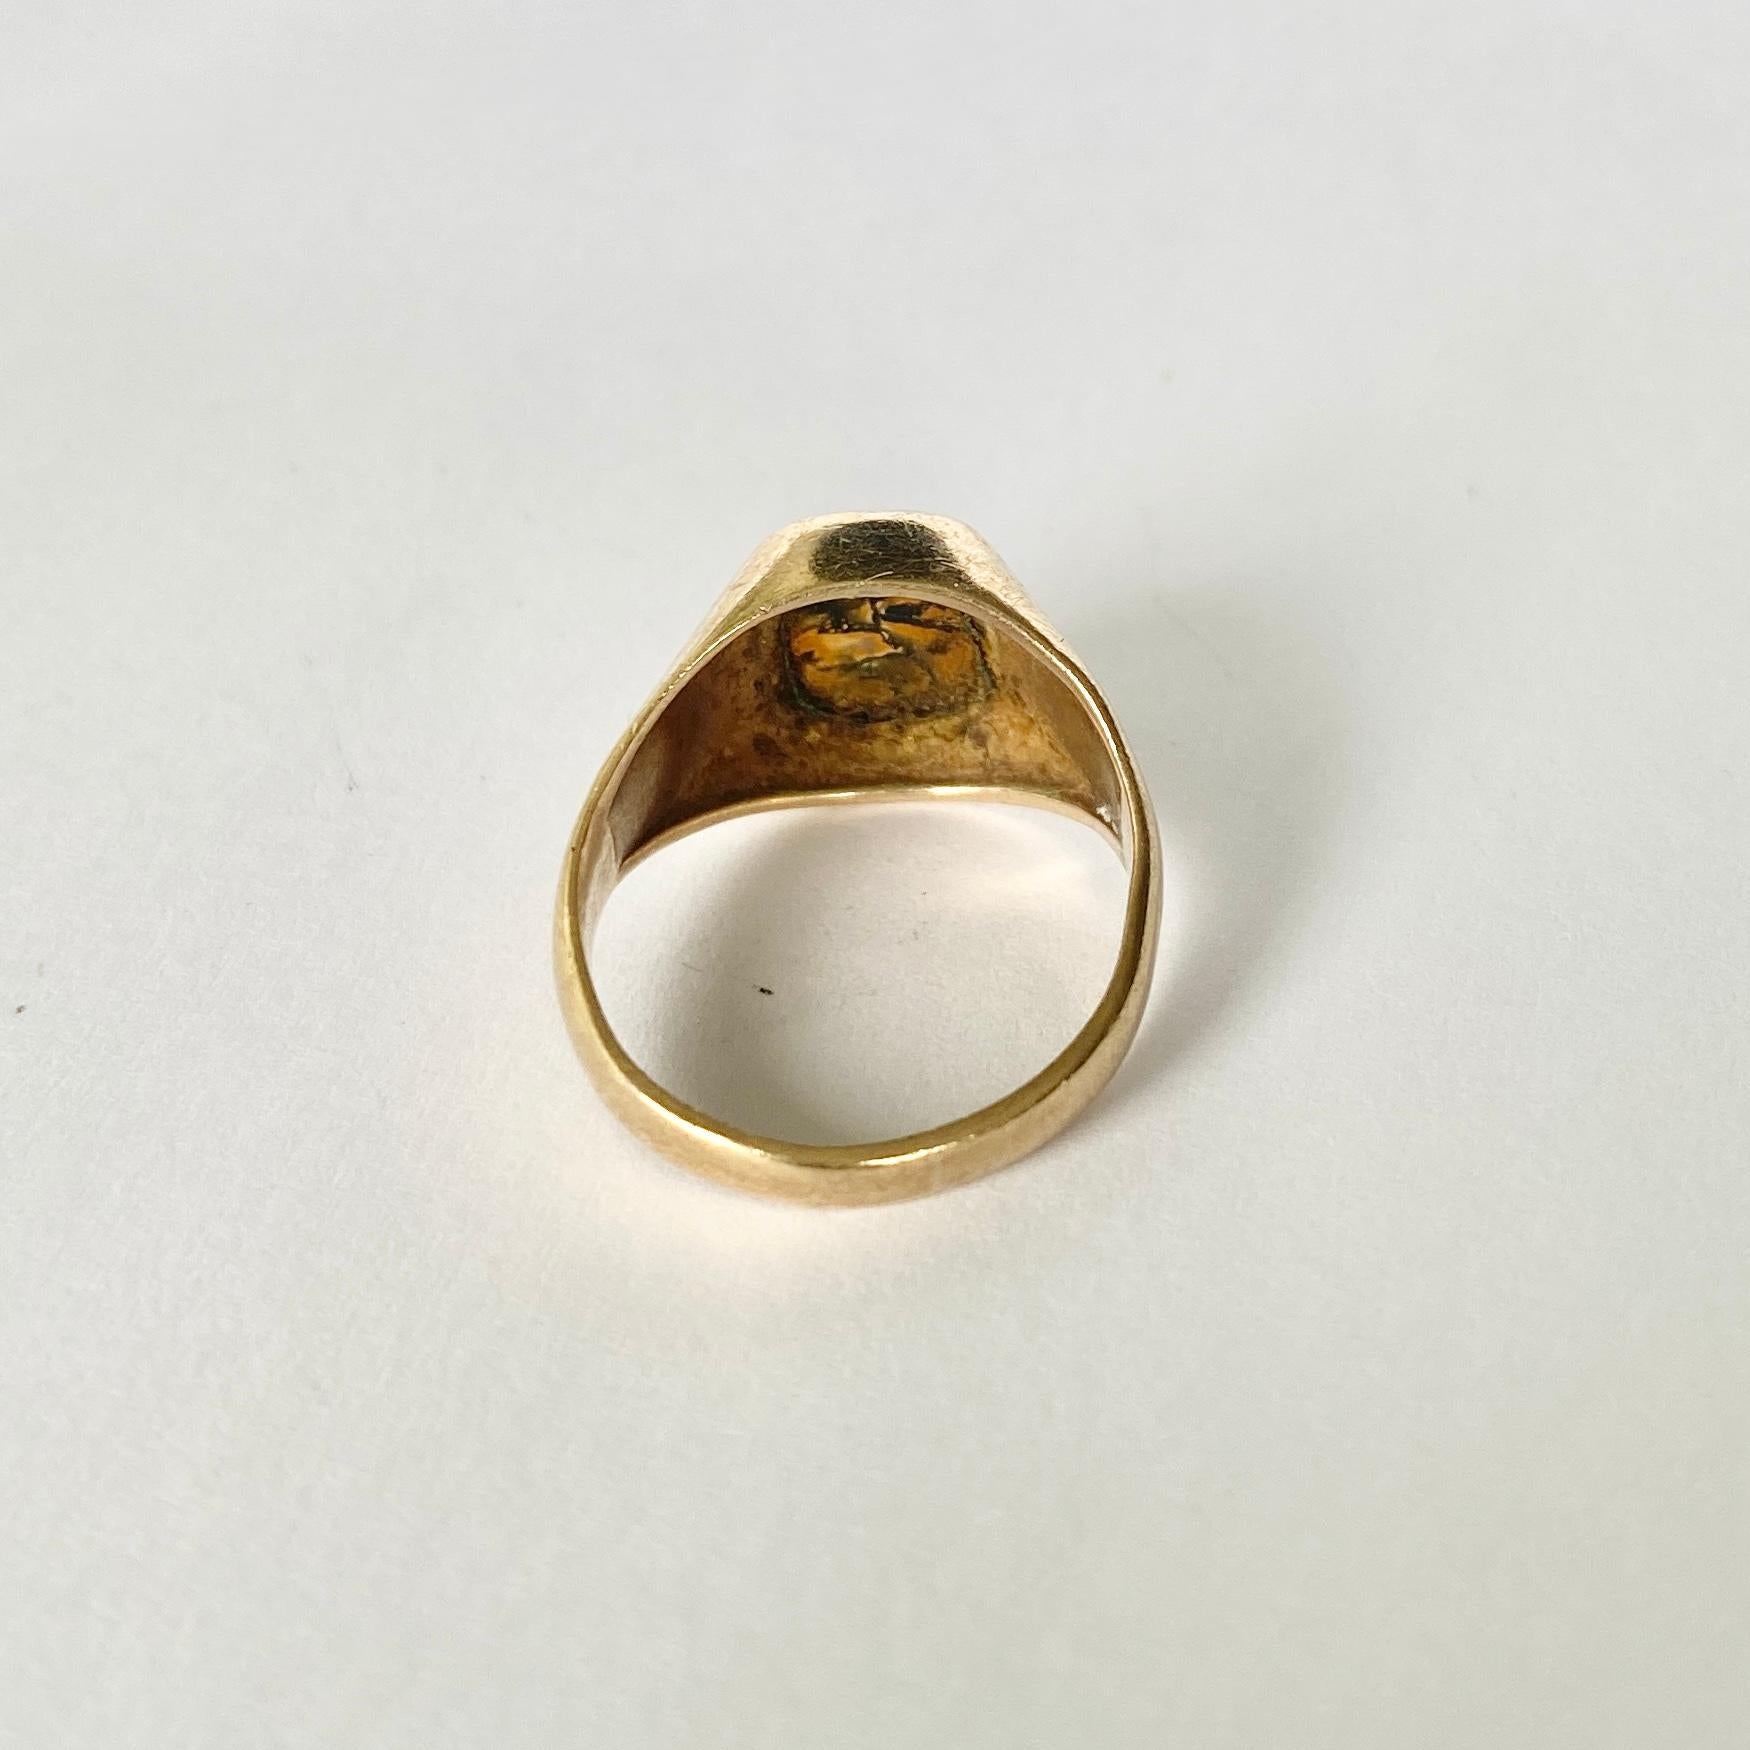 This wonderful moss agate stone has marbling of deep green and amber colour running through. Surrounding the stone there is a simple frame and simple setting. Fully hallmarked Birmingham 1921.

Ring Size: J 1/2 or 5 
Stone Dimensions: 9x7mm